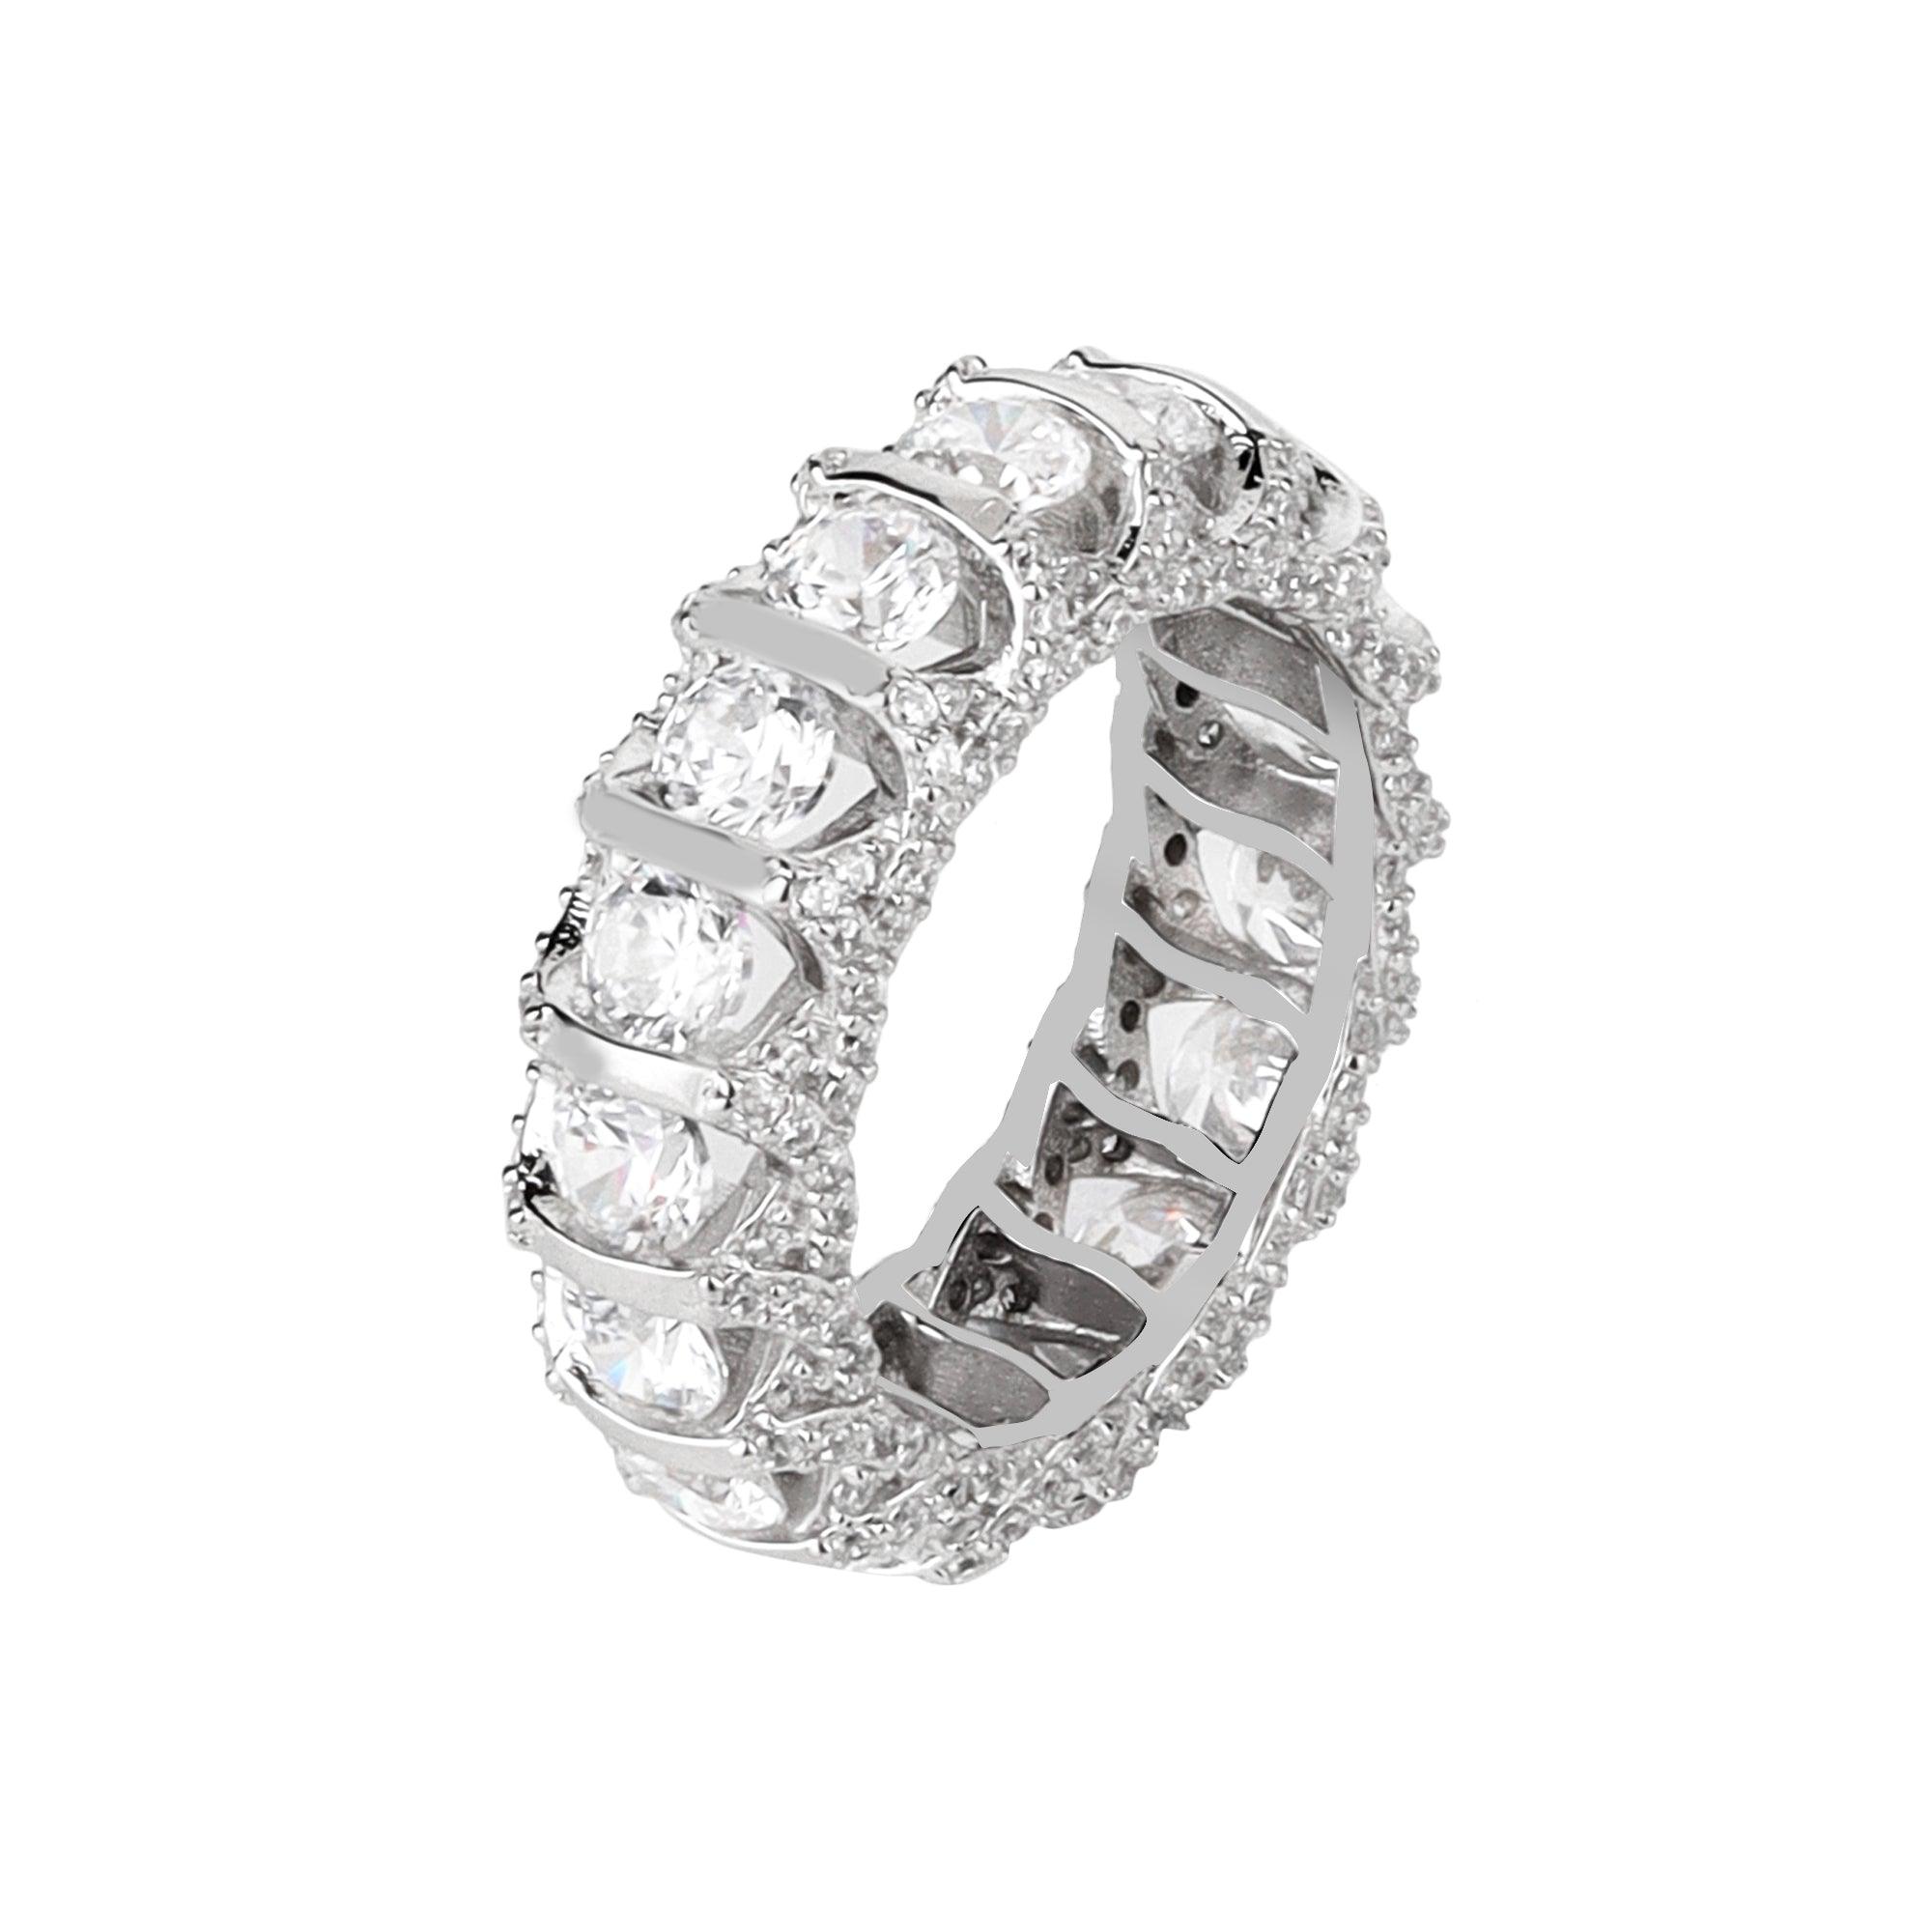 Silvermark Sparkling Eternity Ring with Round Shaped Stones - silvermark